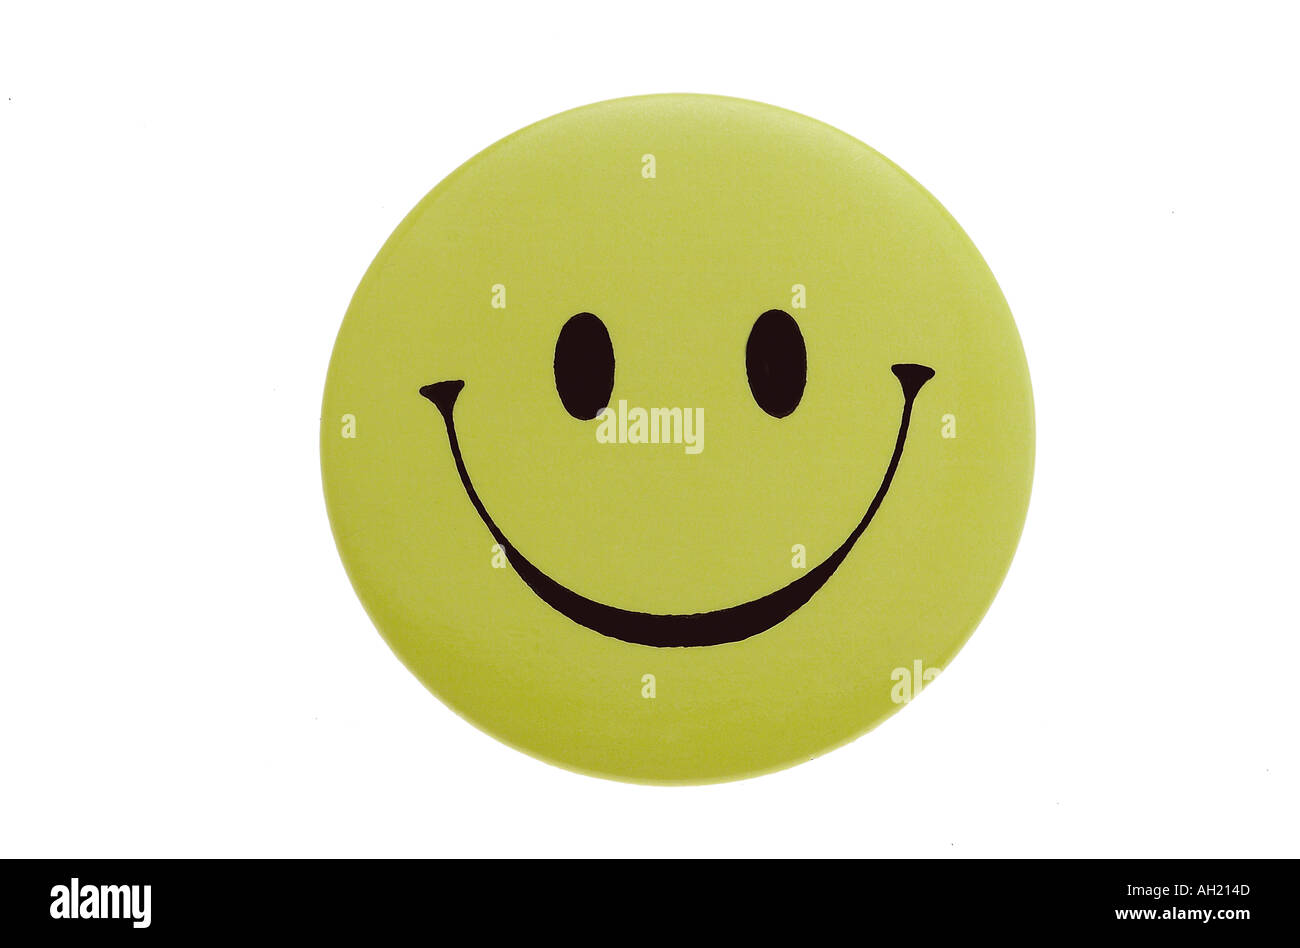 yellow smiley face button silhouetted on white background Stock Photo